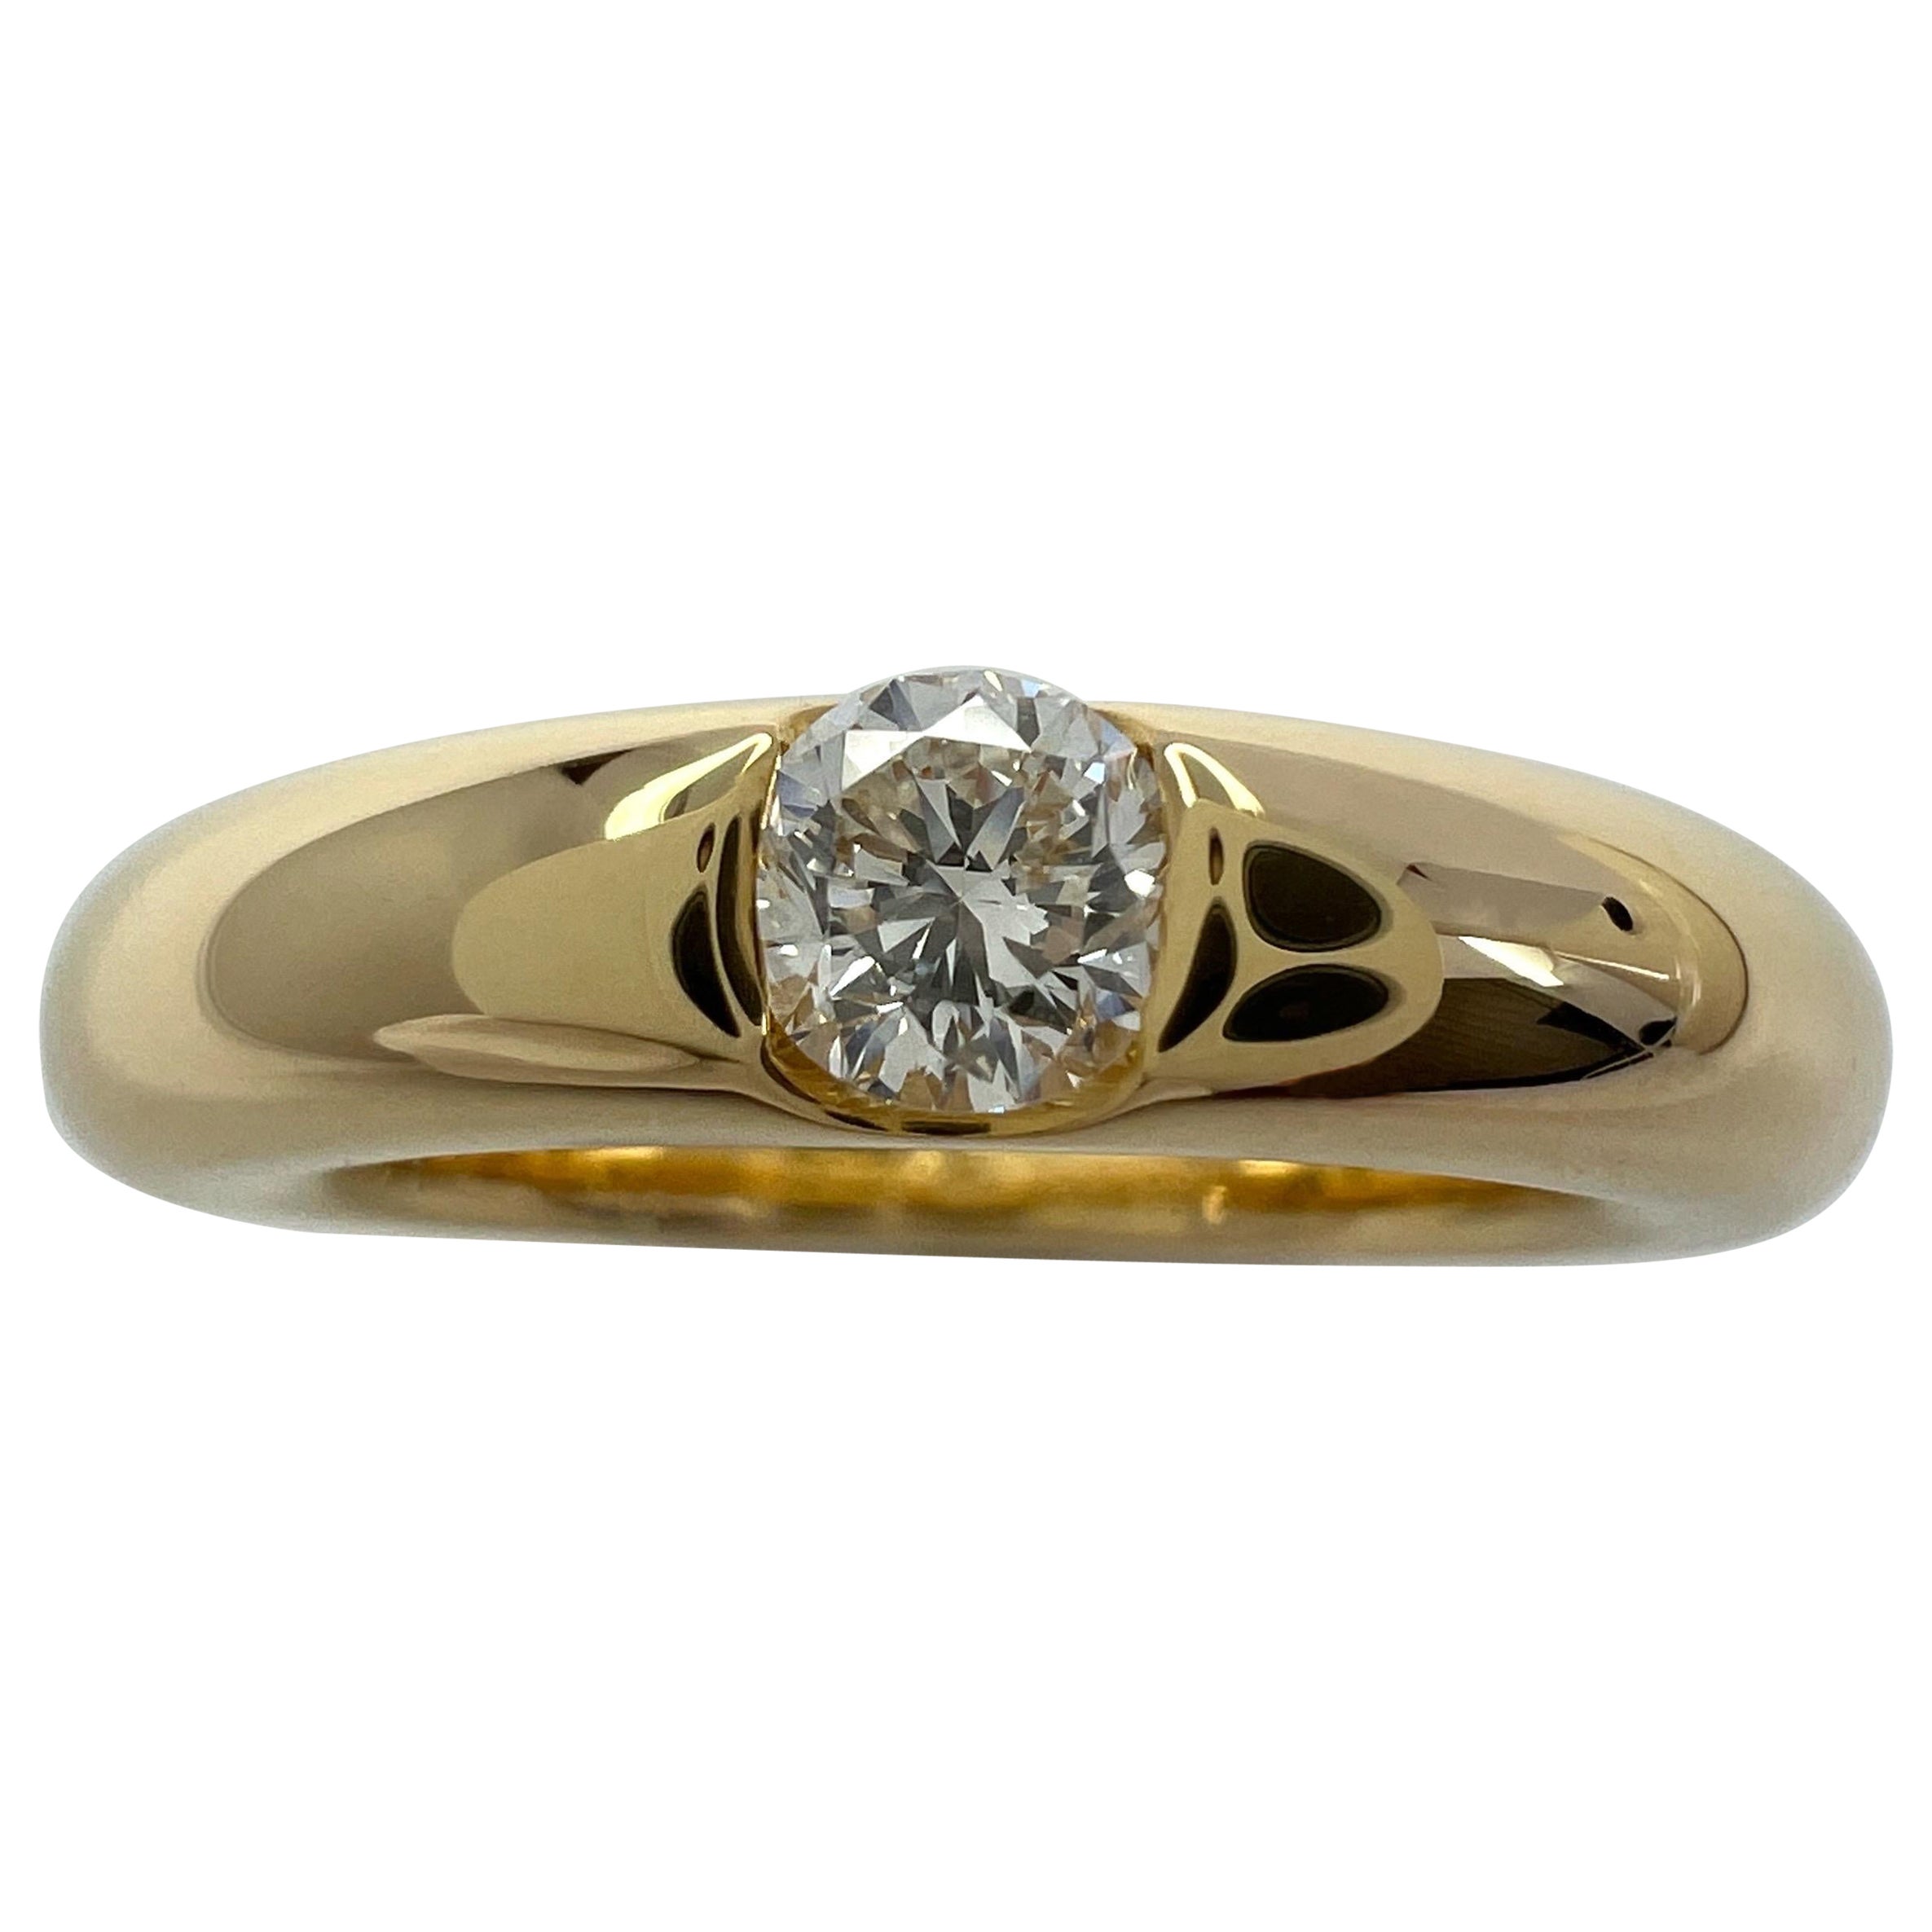 Vintage Cartier Round Diamond Ellipse 18k Yellow Gold Solitaire Band Ring US5 49 For Sale